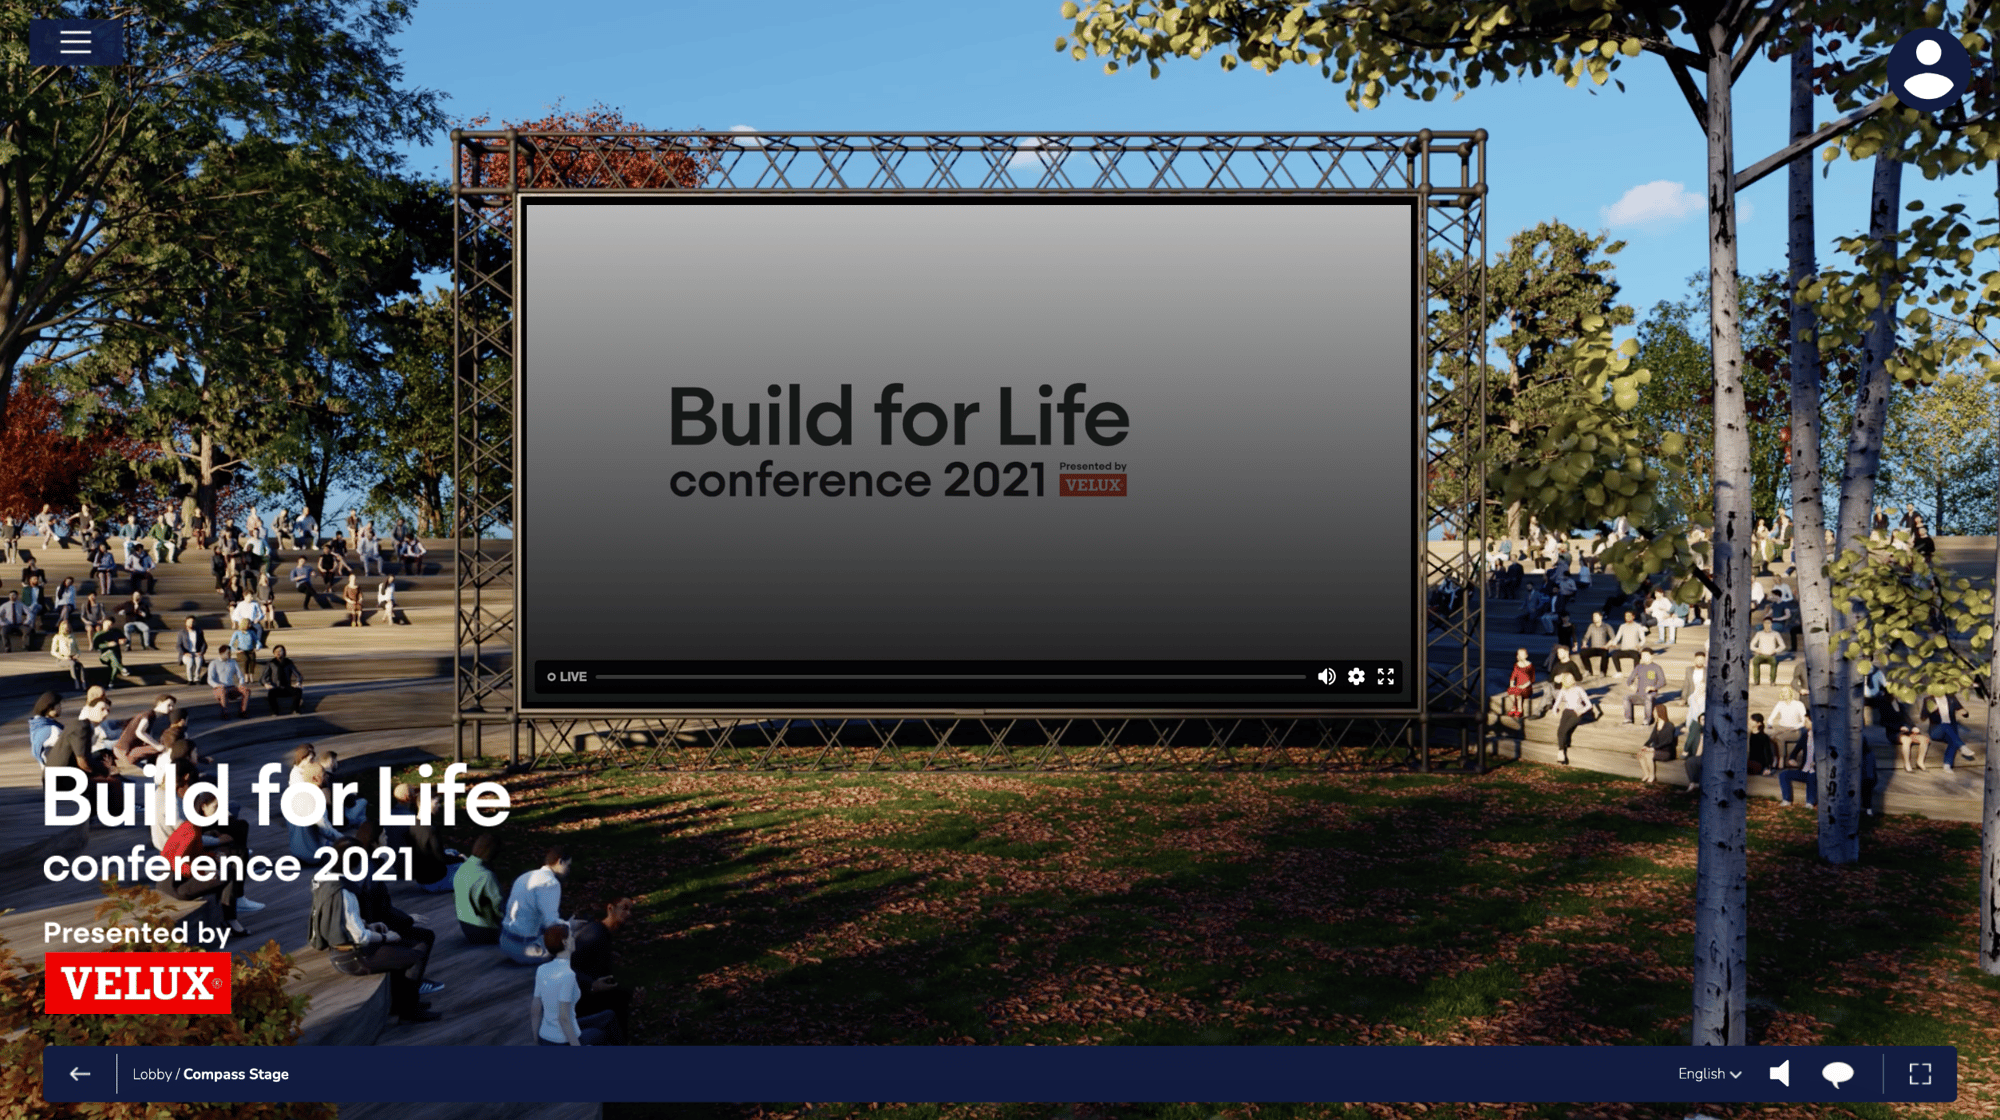 Velux - build for life conference 2